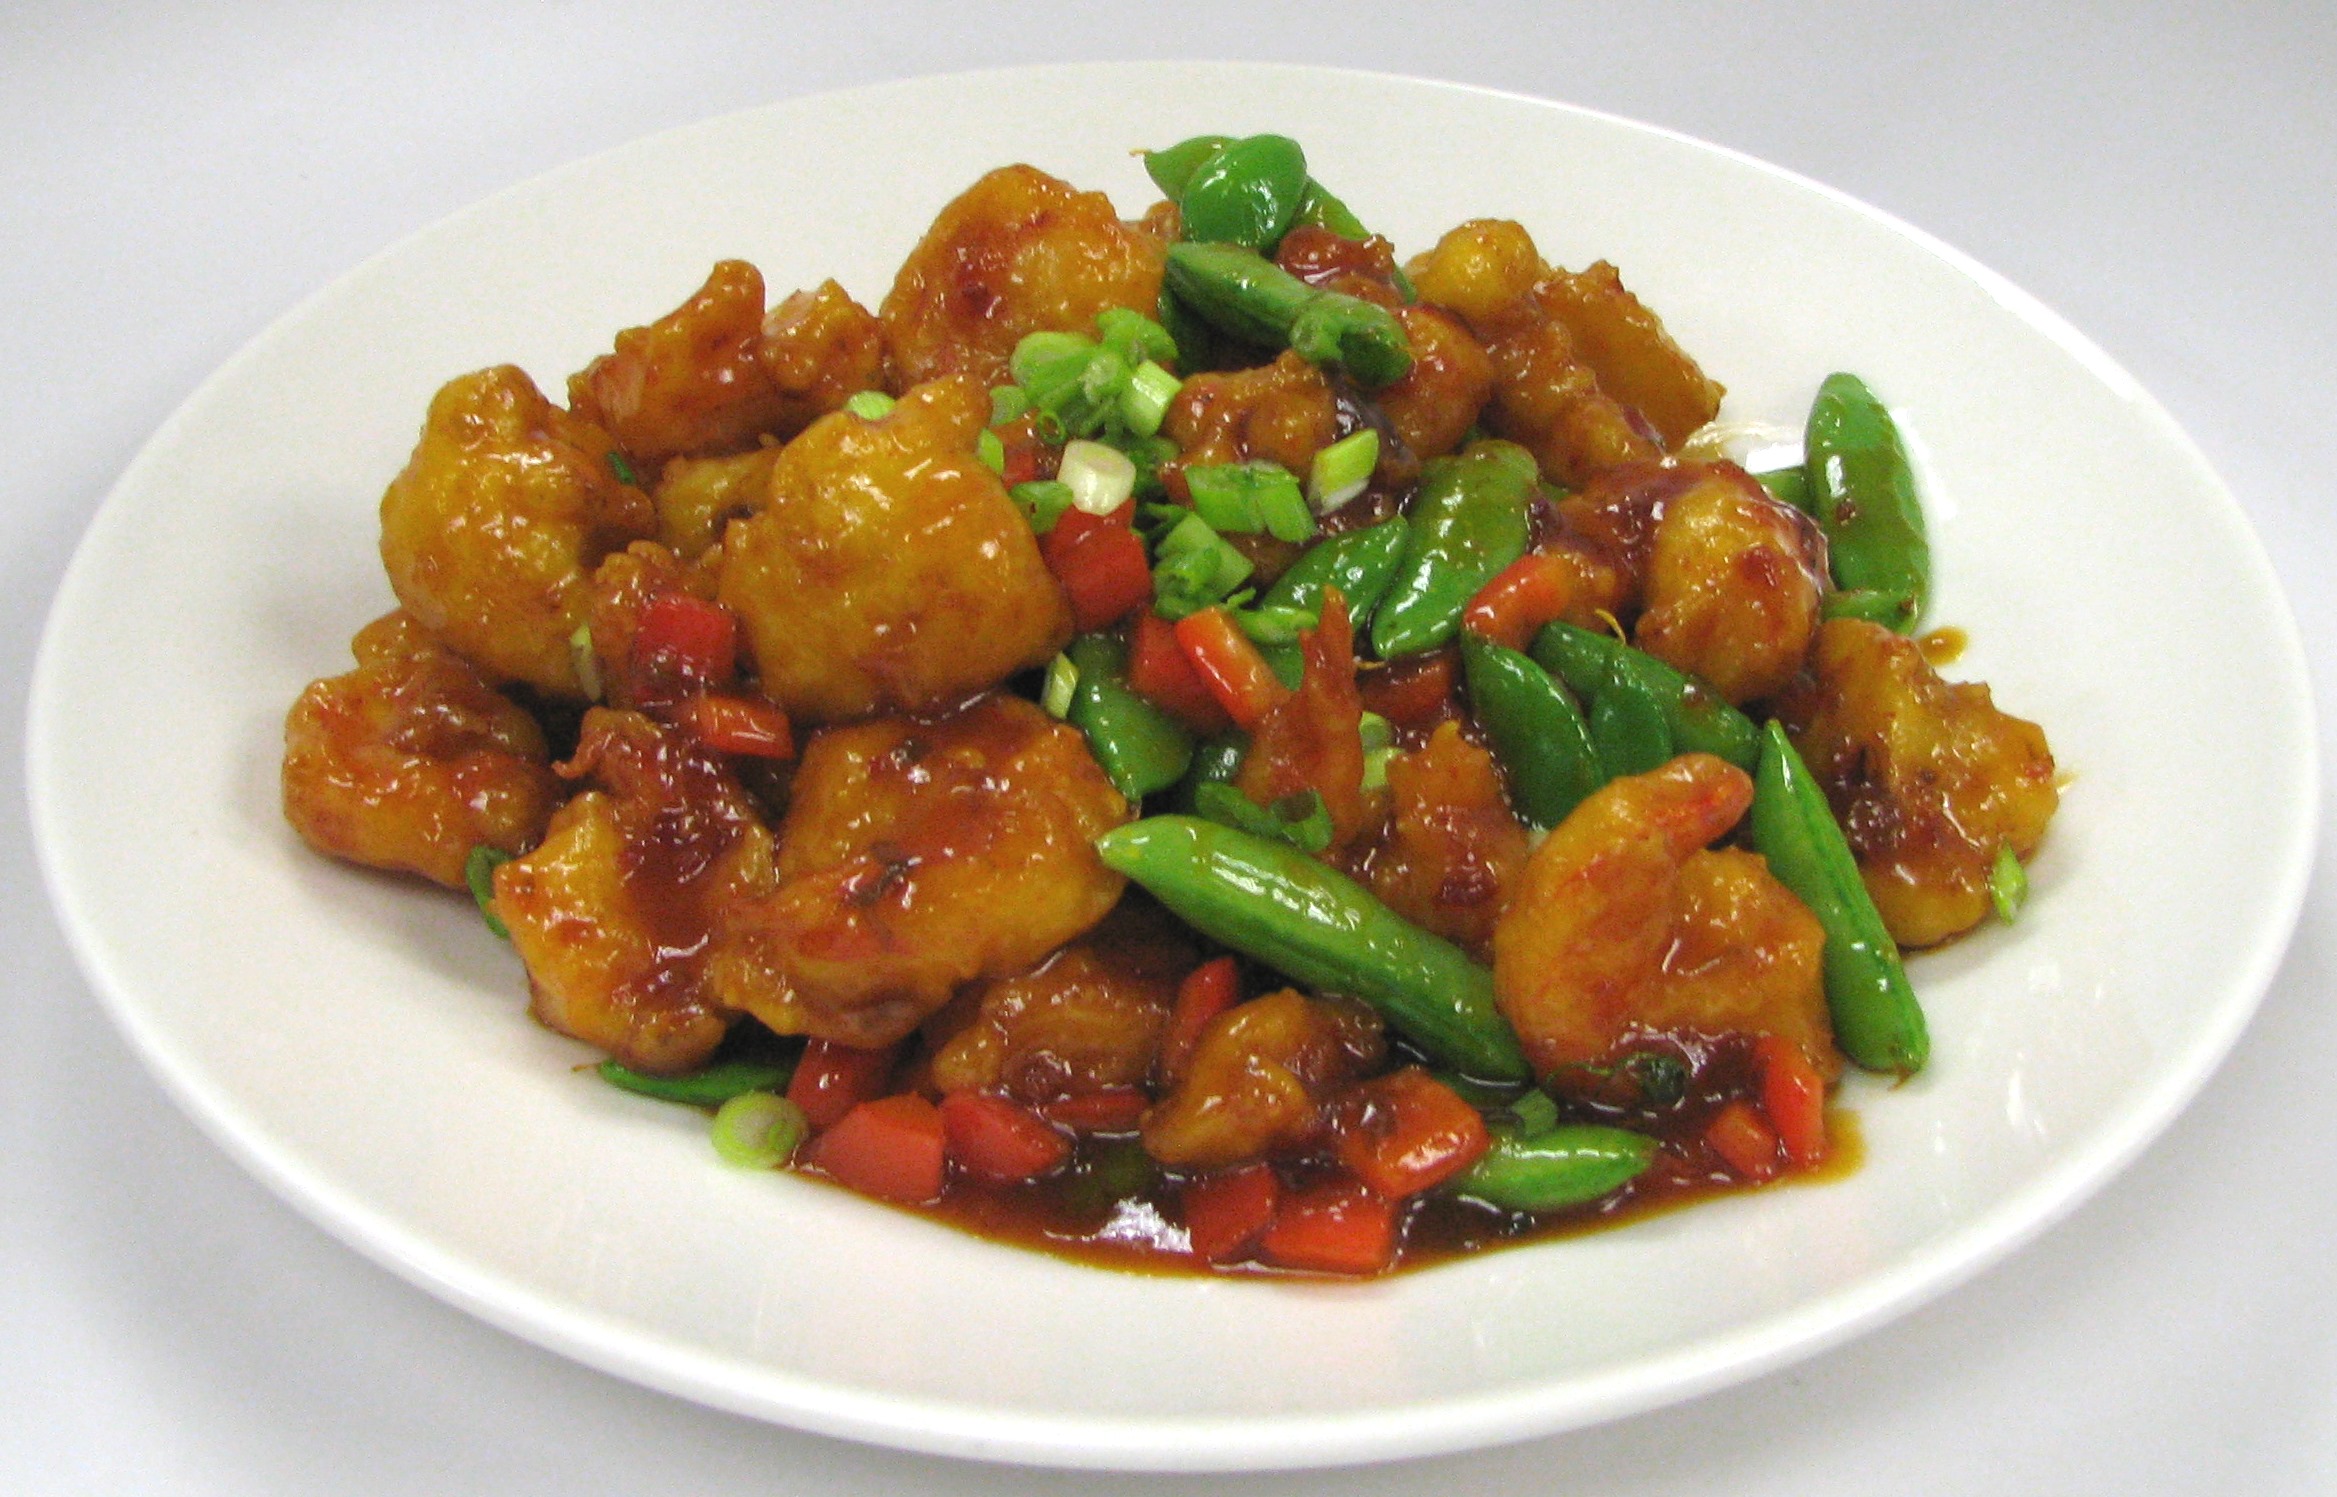 Kung pao shrimp is one of the special dishes on Legal Sea Foods Shrimp Classic menu. (Photo: Legal Sea Foods)